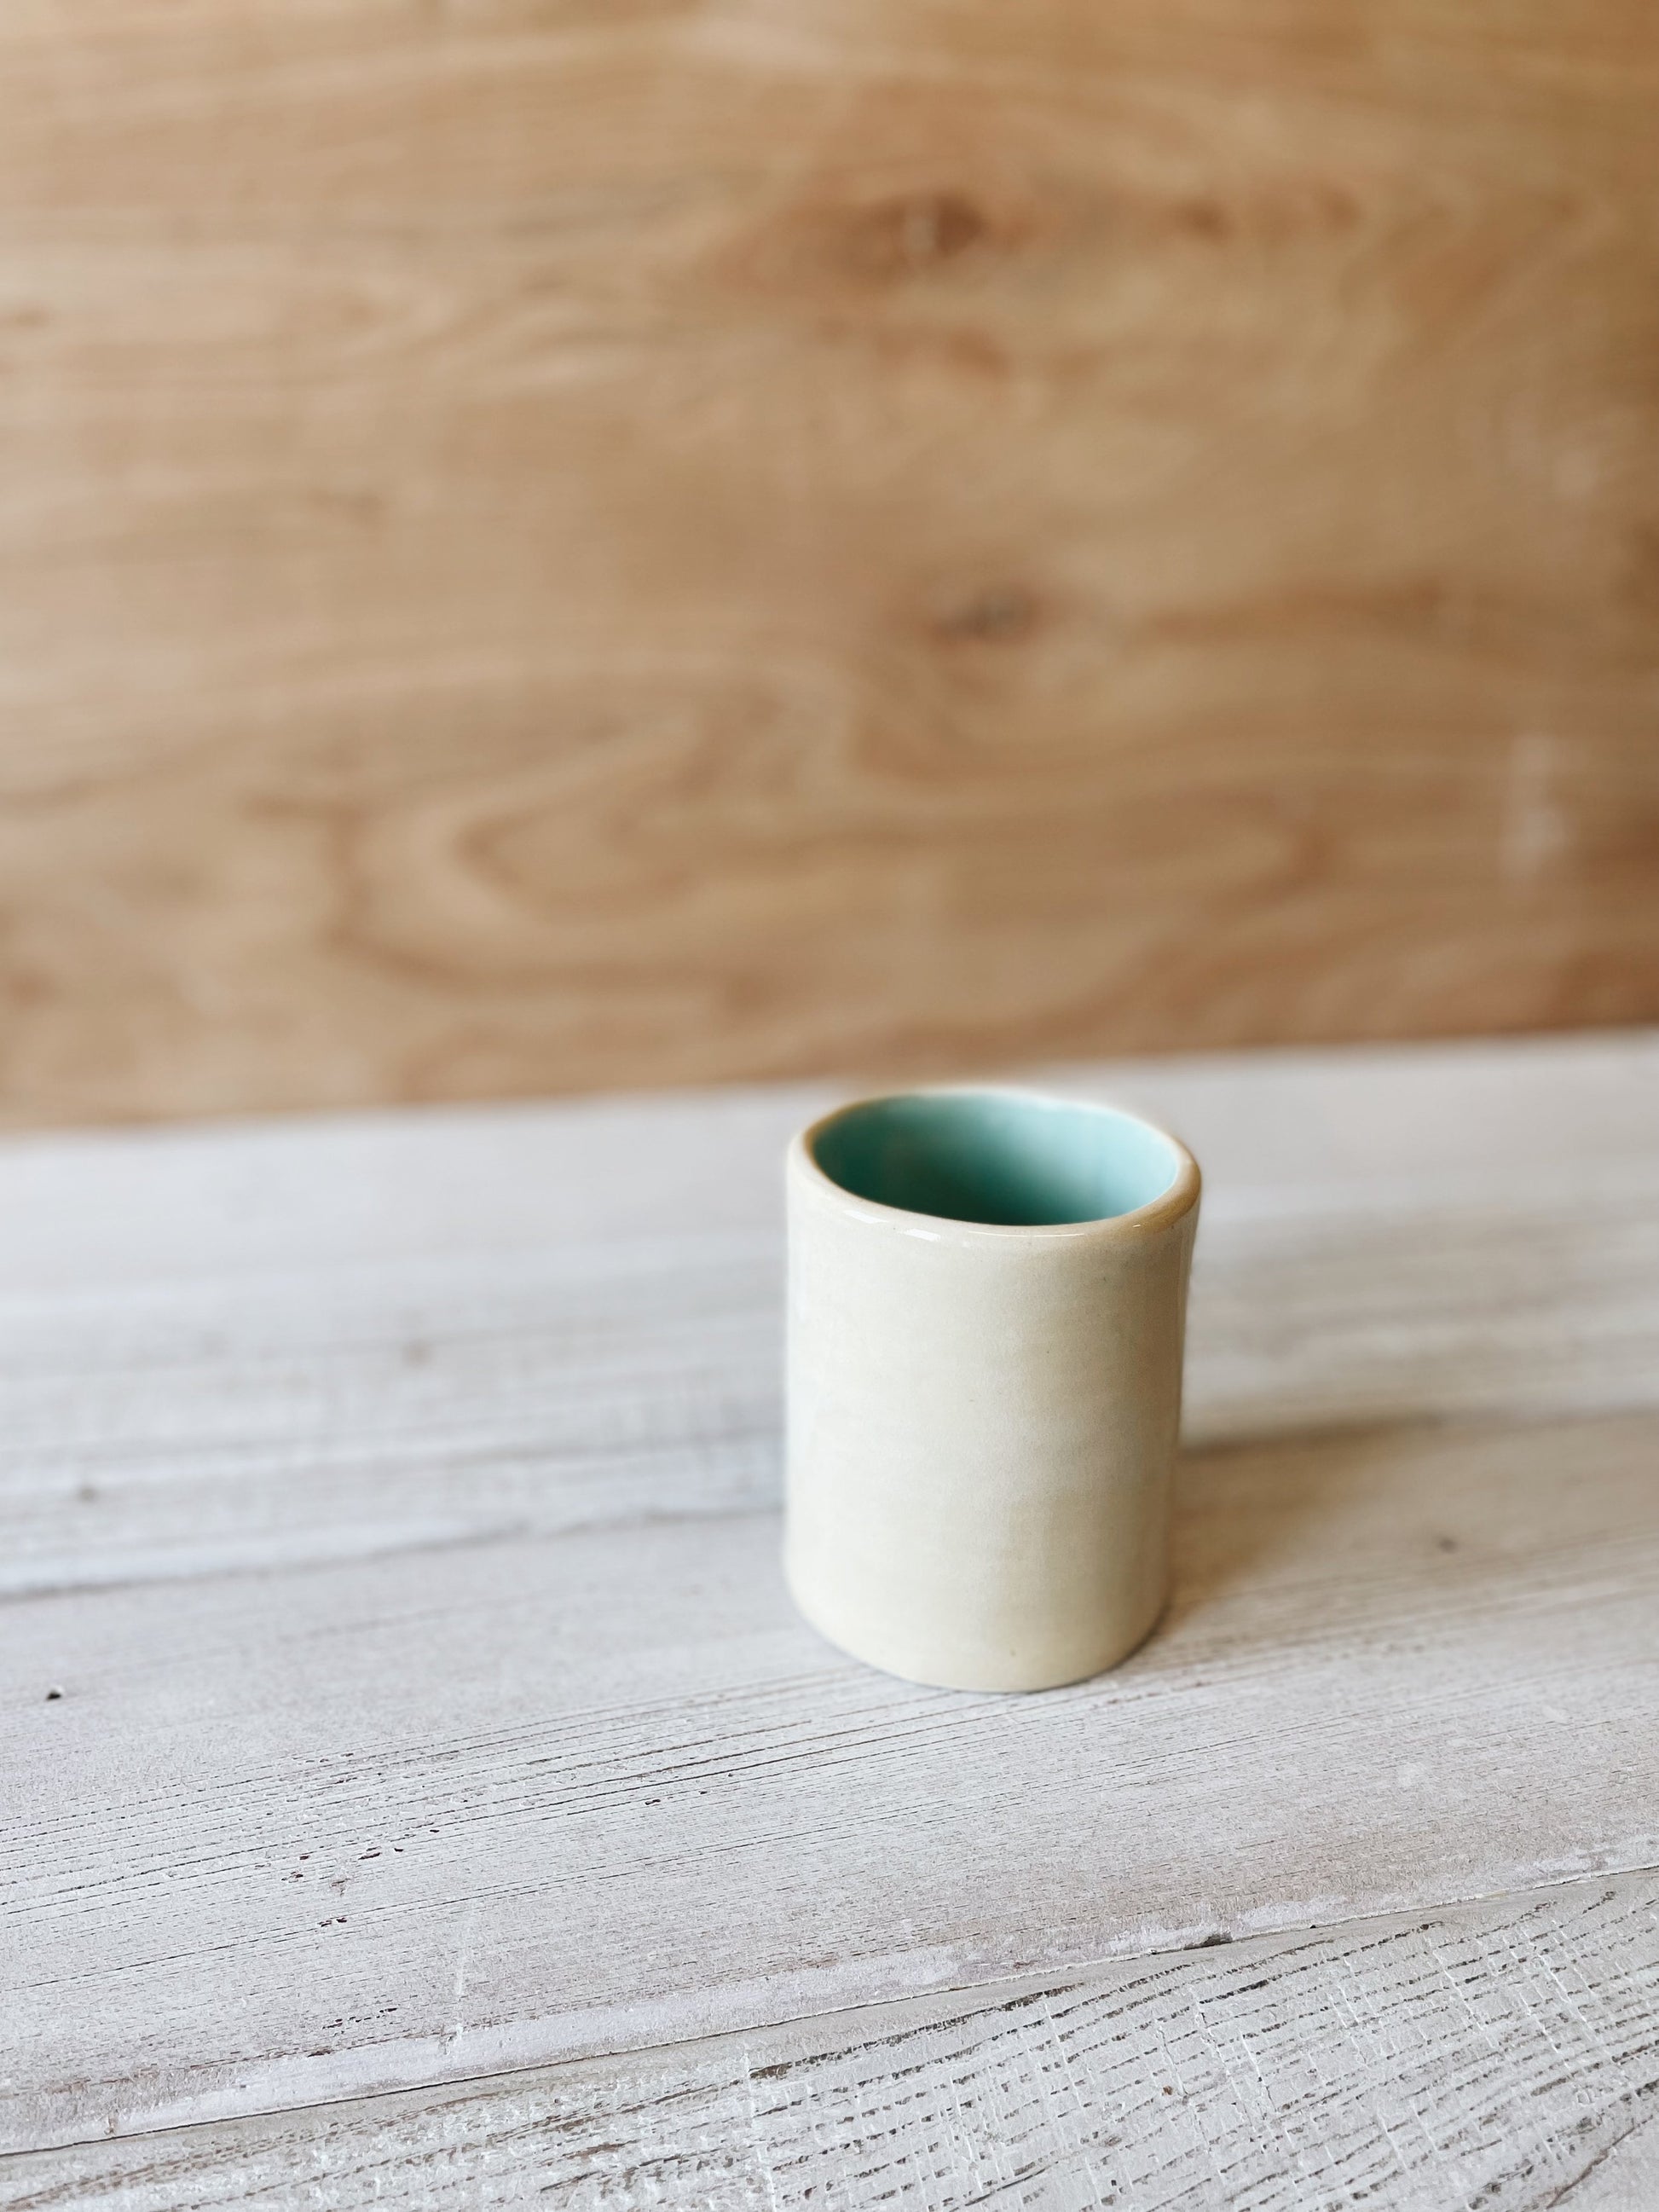 Small ceramic cup on wooden table.